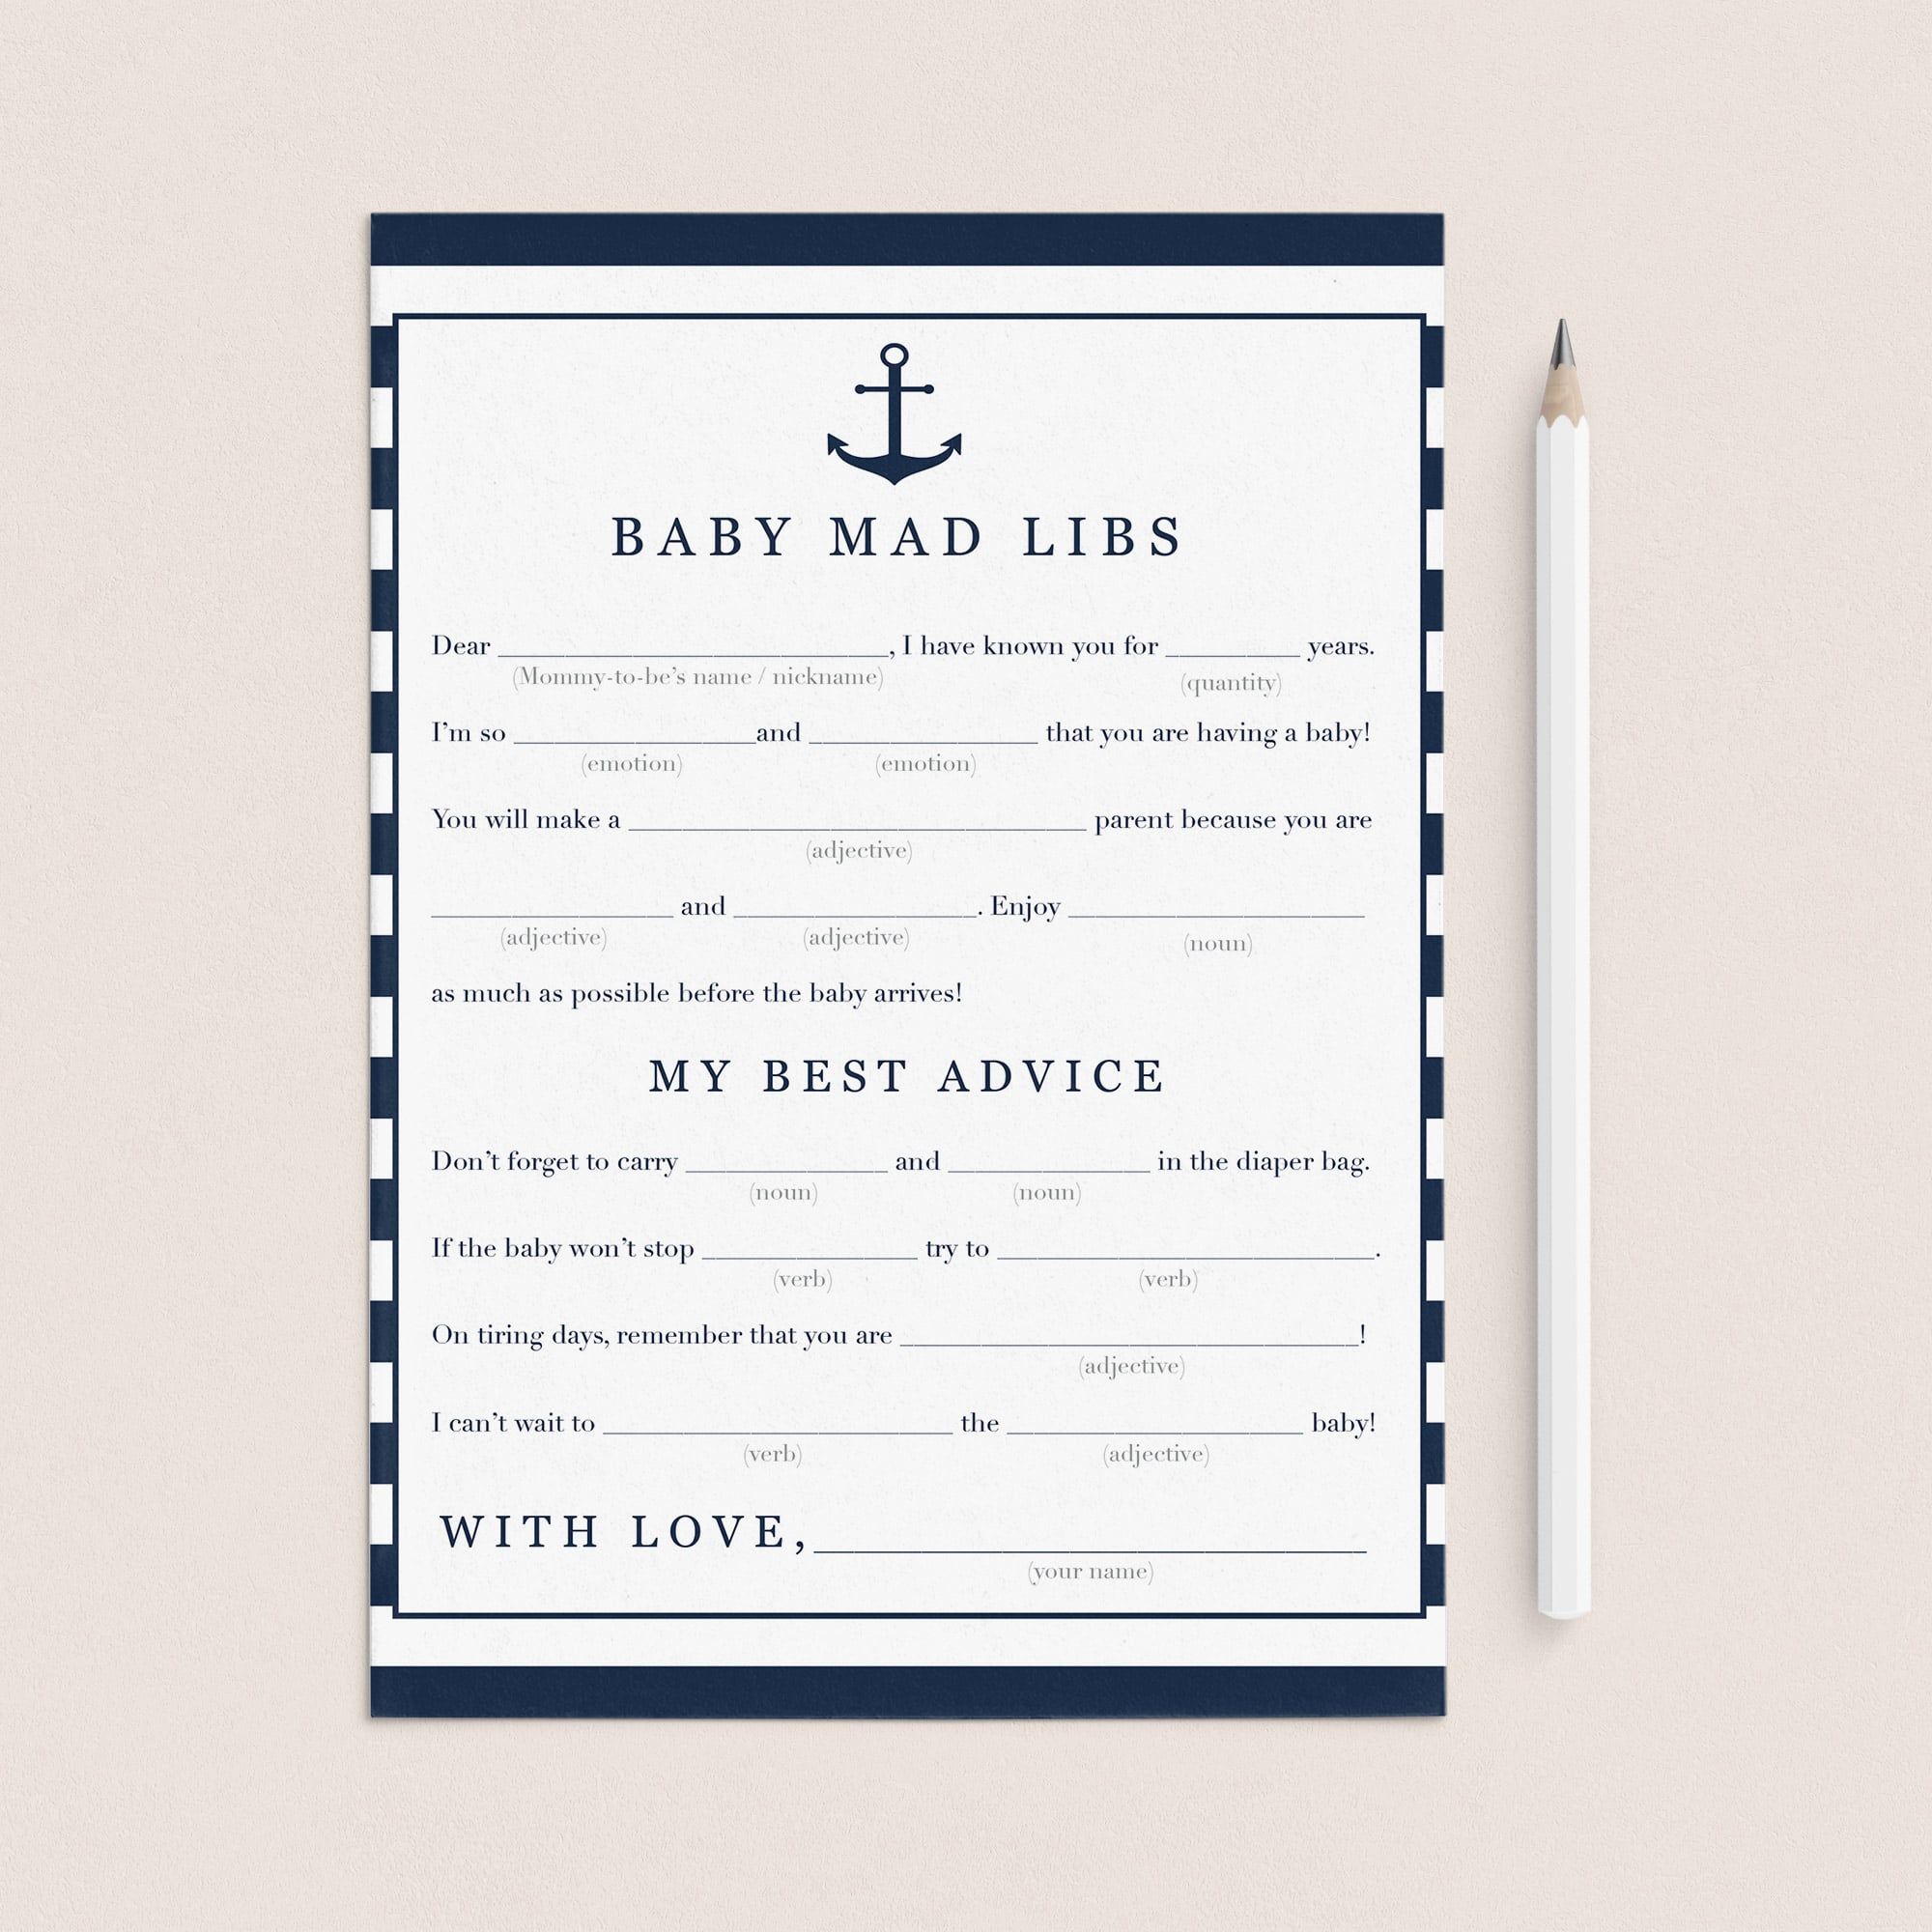 Baby advice and well wishes cards printable by LittleSizzle